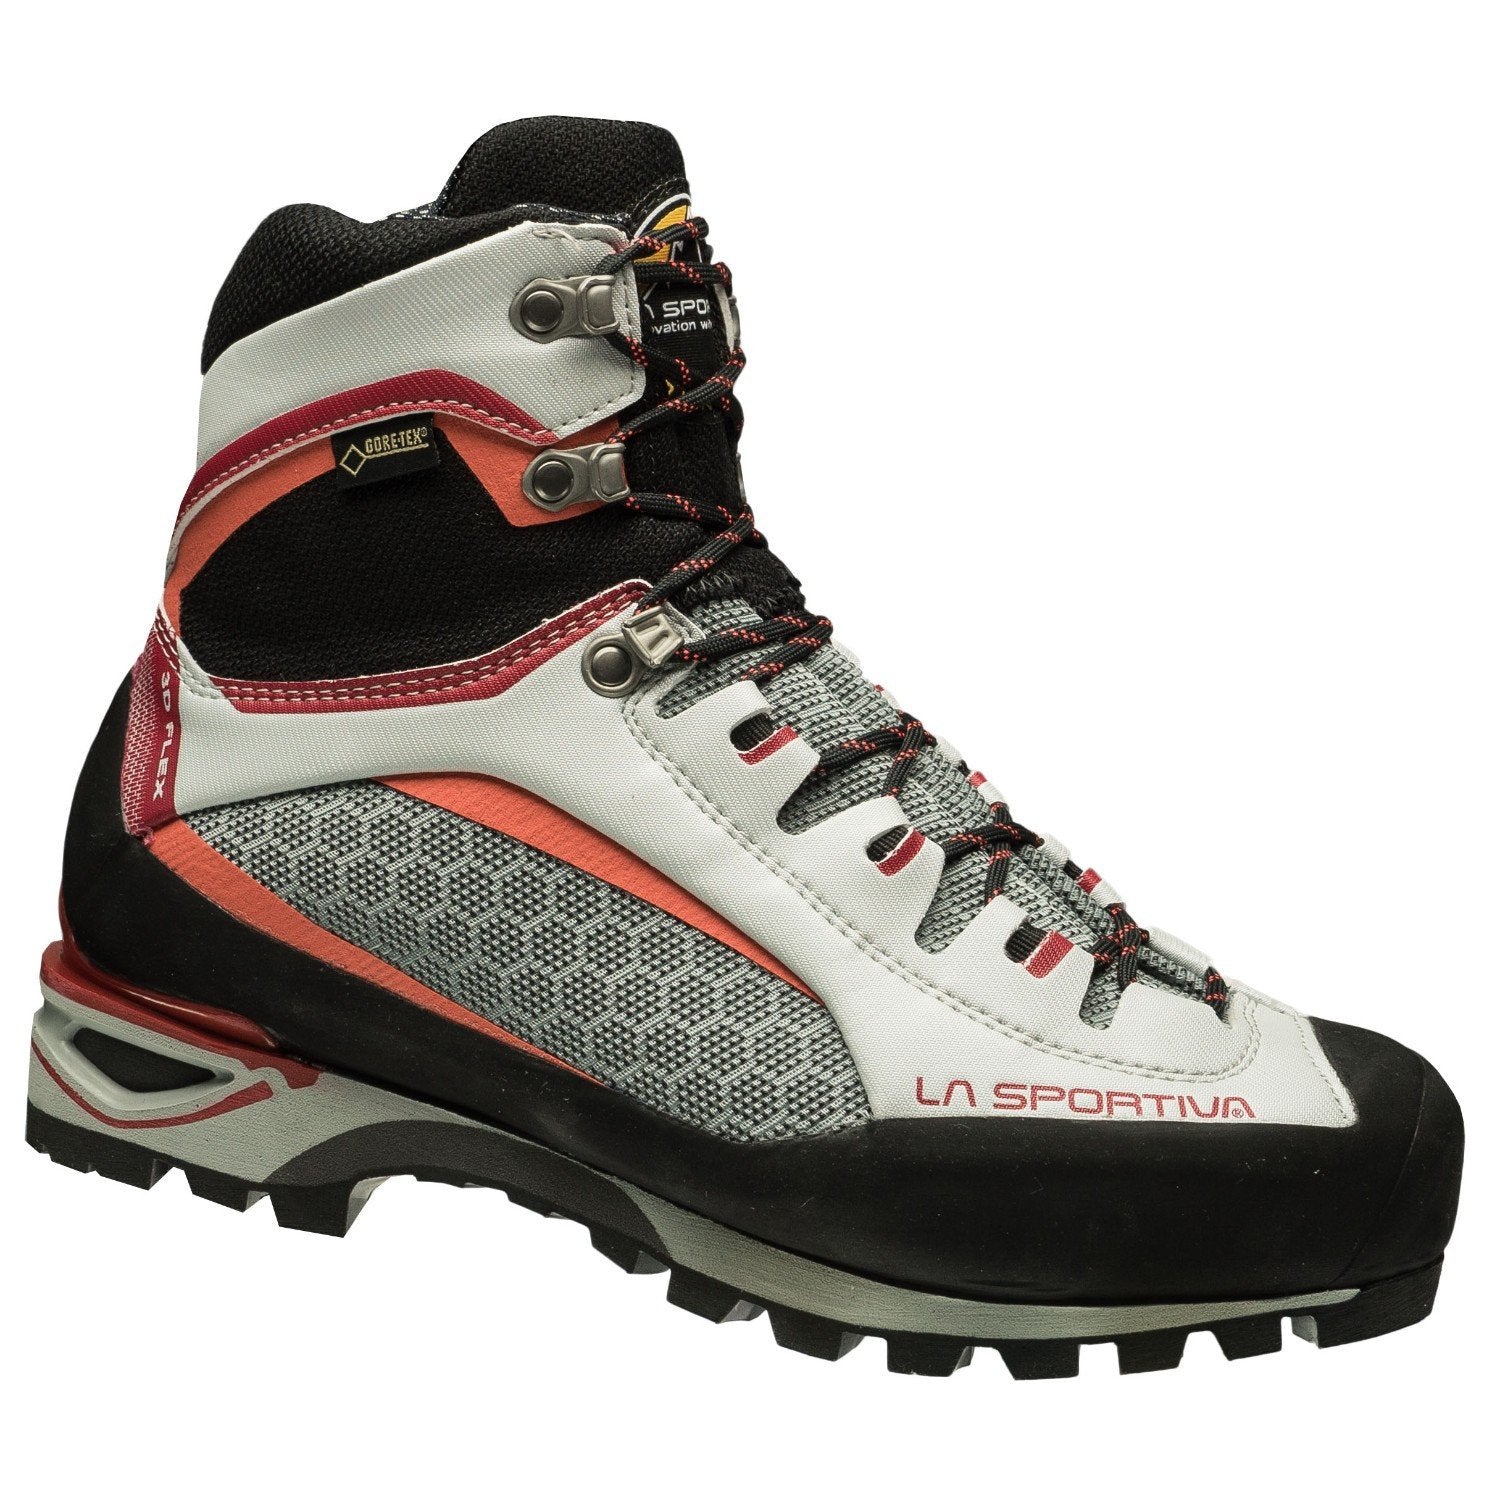 La Sportiva Trango Tower GTX Womens mountaineering boot, in black, grey and red colours